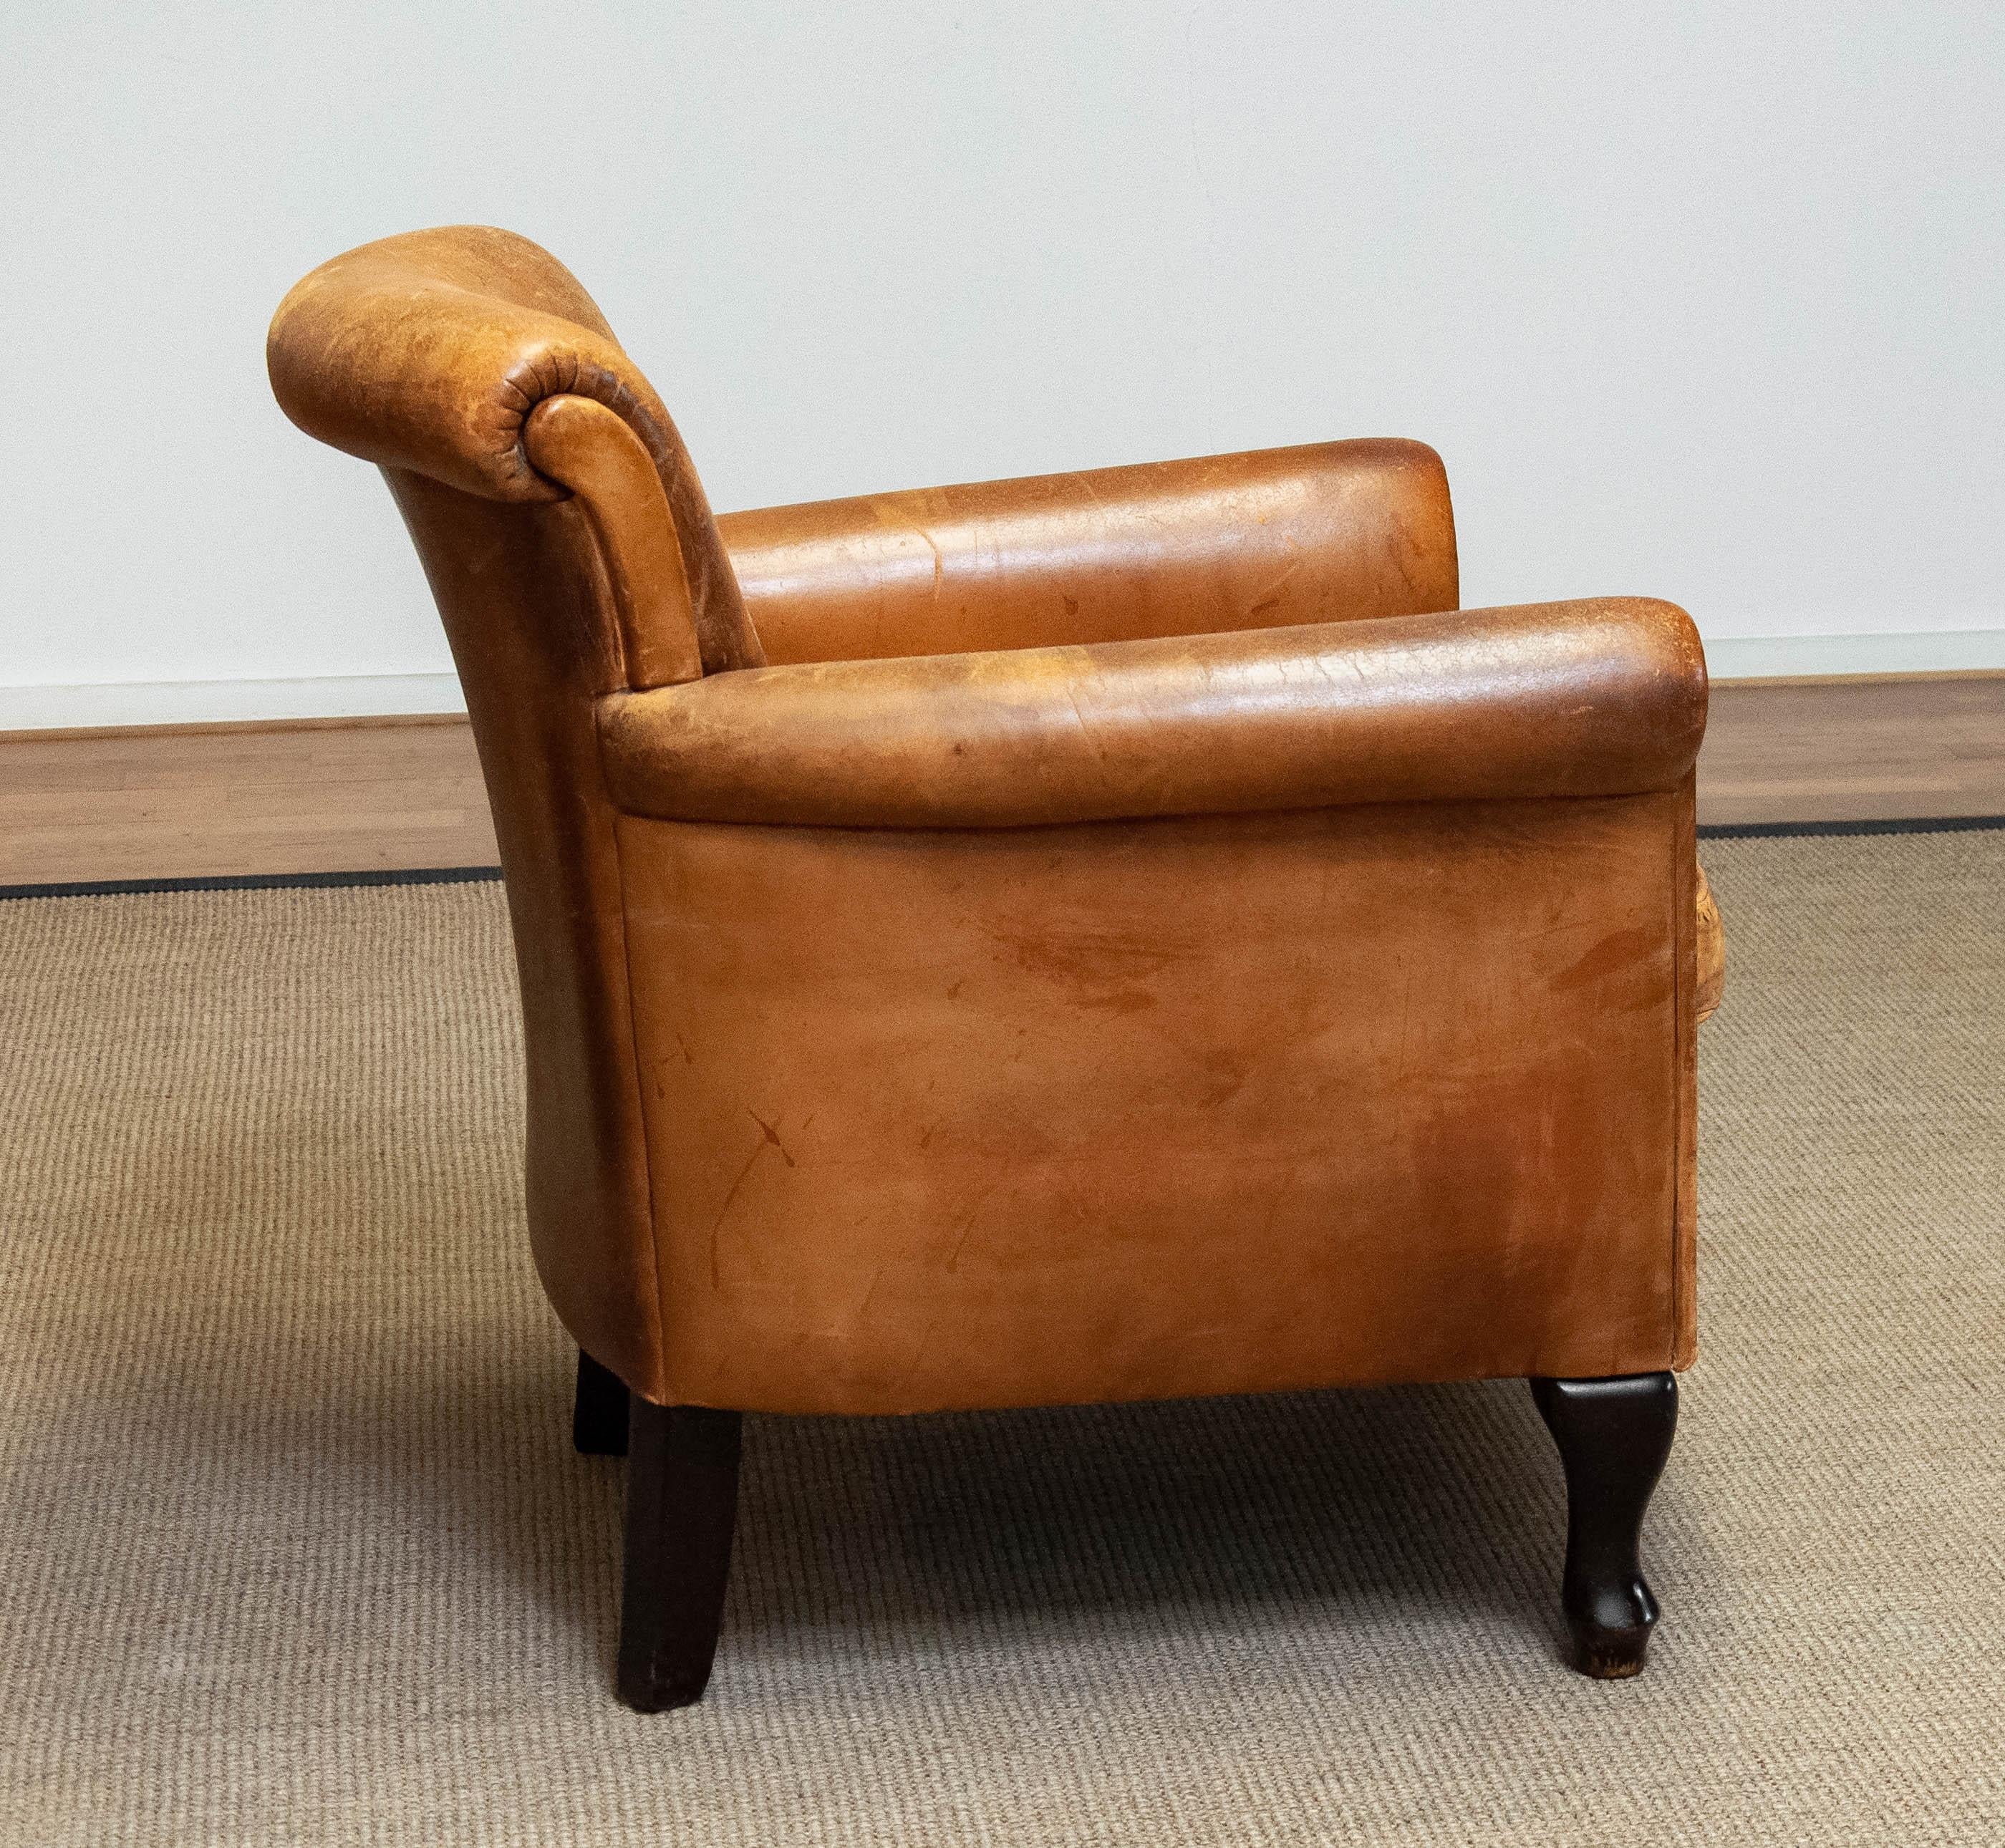 1960s Brown / Tan French Art Deco 'Sheep' Leather Roll Back Lounge / Club Chair In Good Condition For Sale In Silvolde, Gelderland